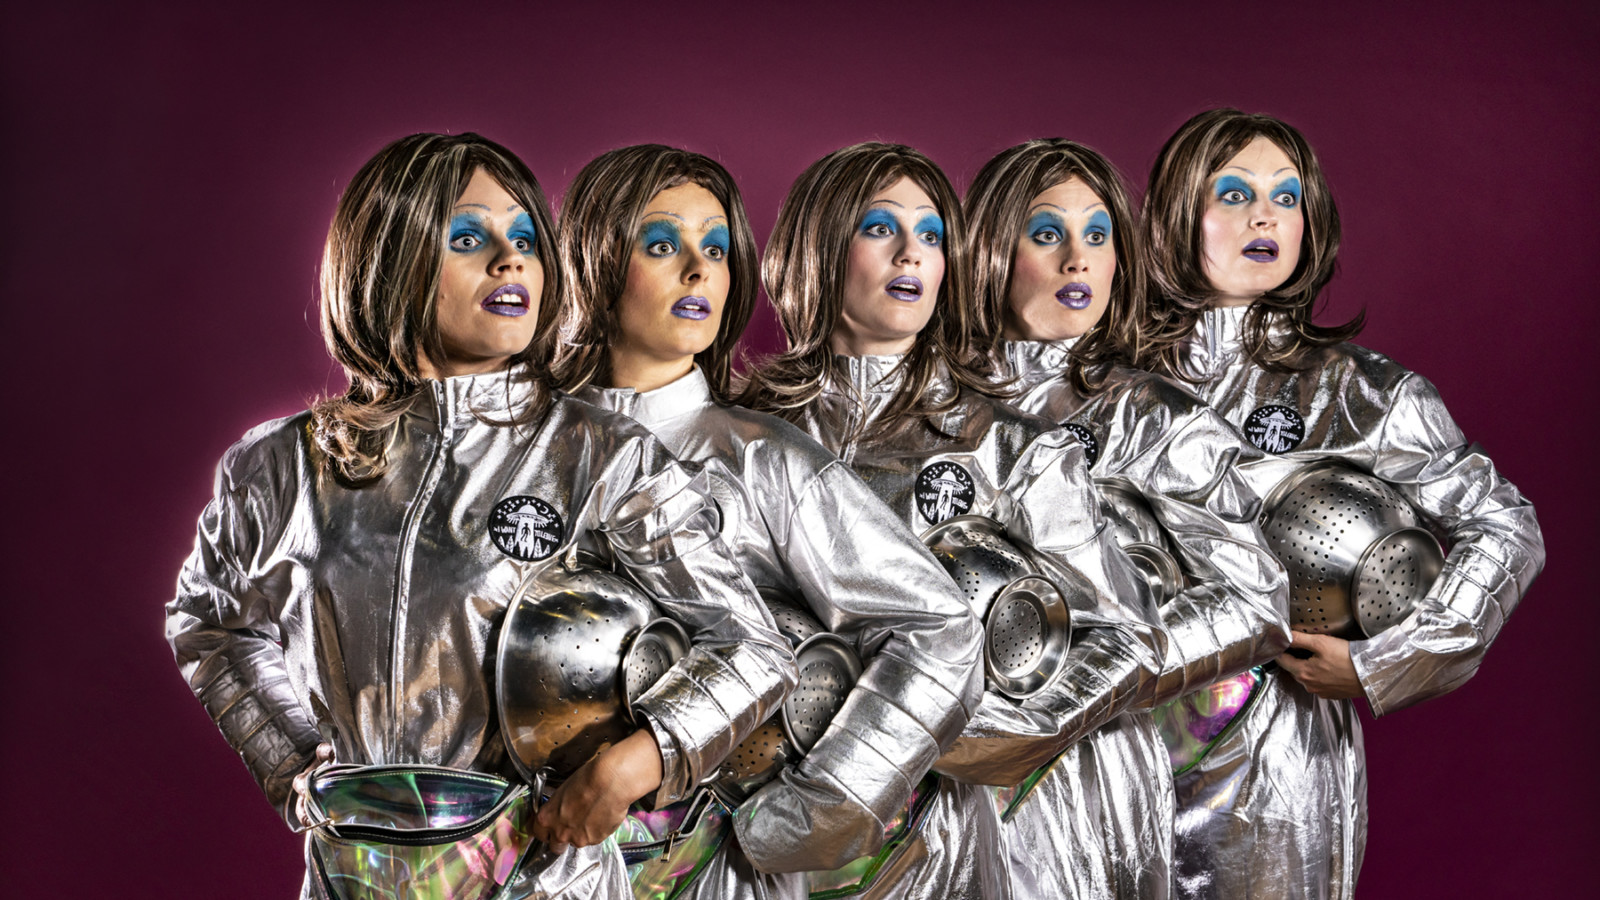 Five people stand in a row. They are wearing shiny silver suits and have bold blue eyeshadow.